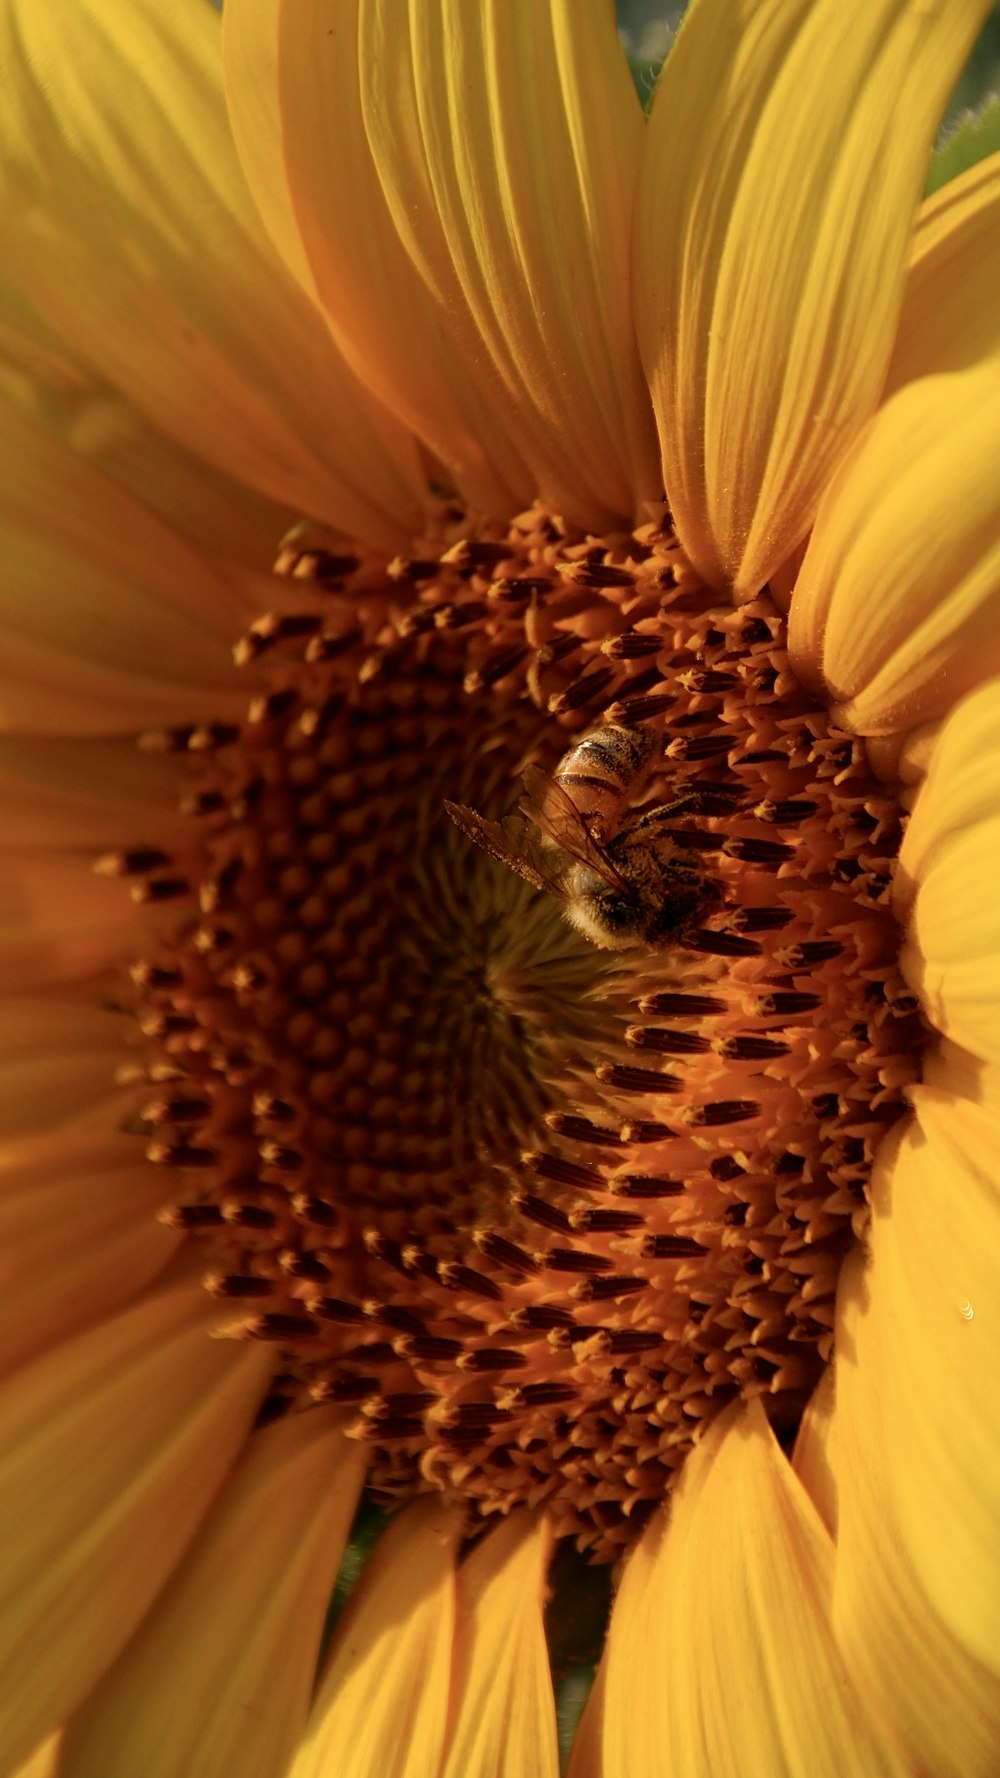 a large sunflower with a bee on it